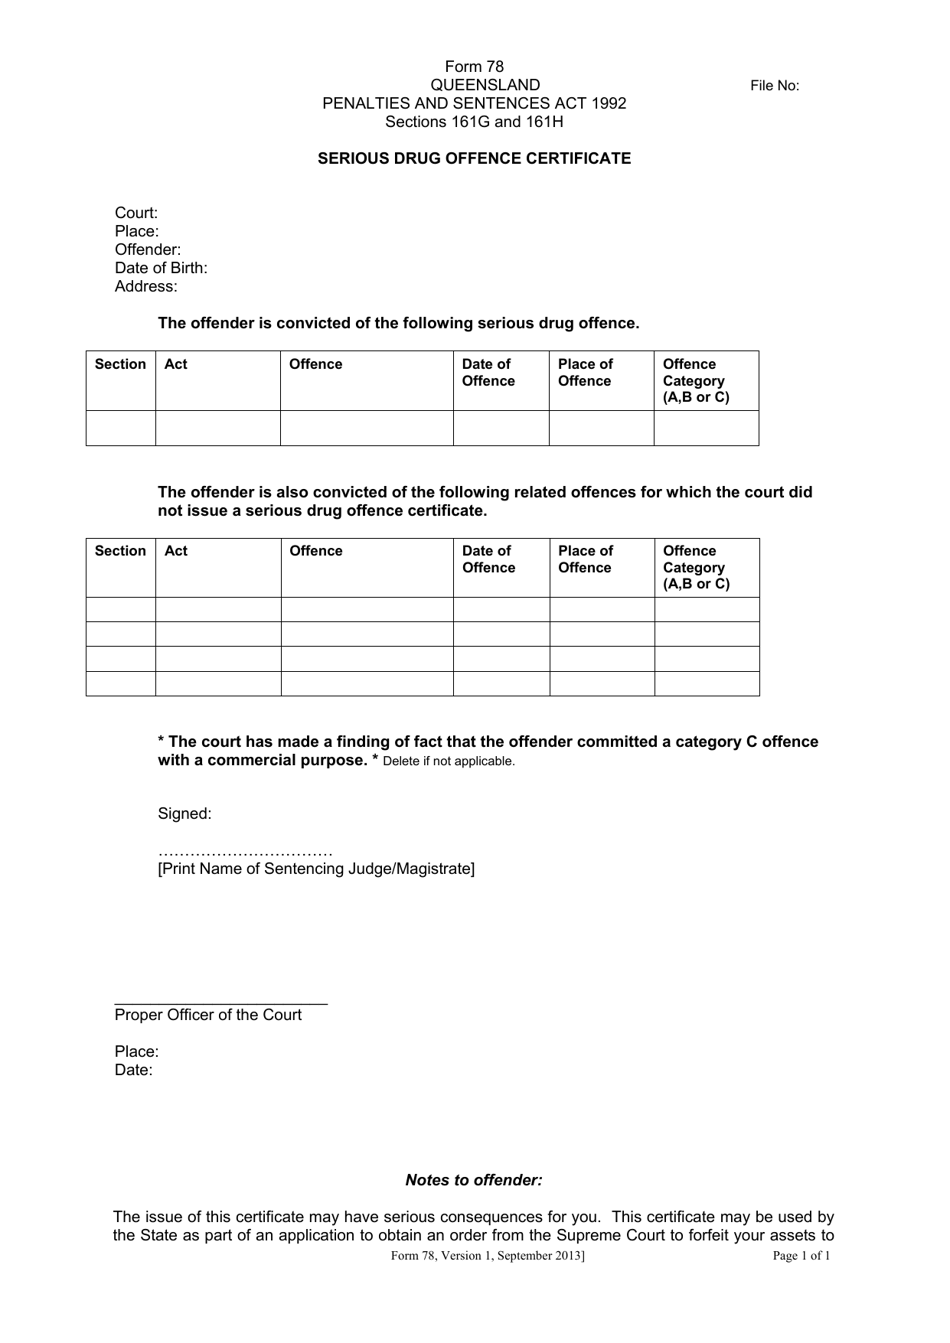 Form 78 Serious Drug Offence Certificate - Queensland, Australia, Page 1